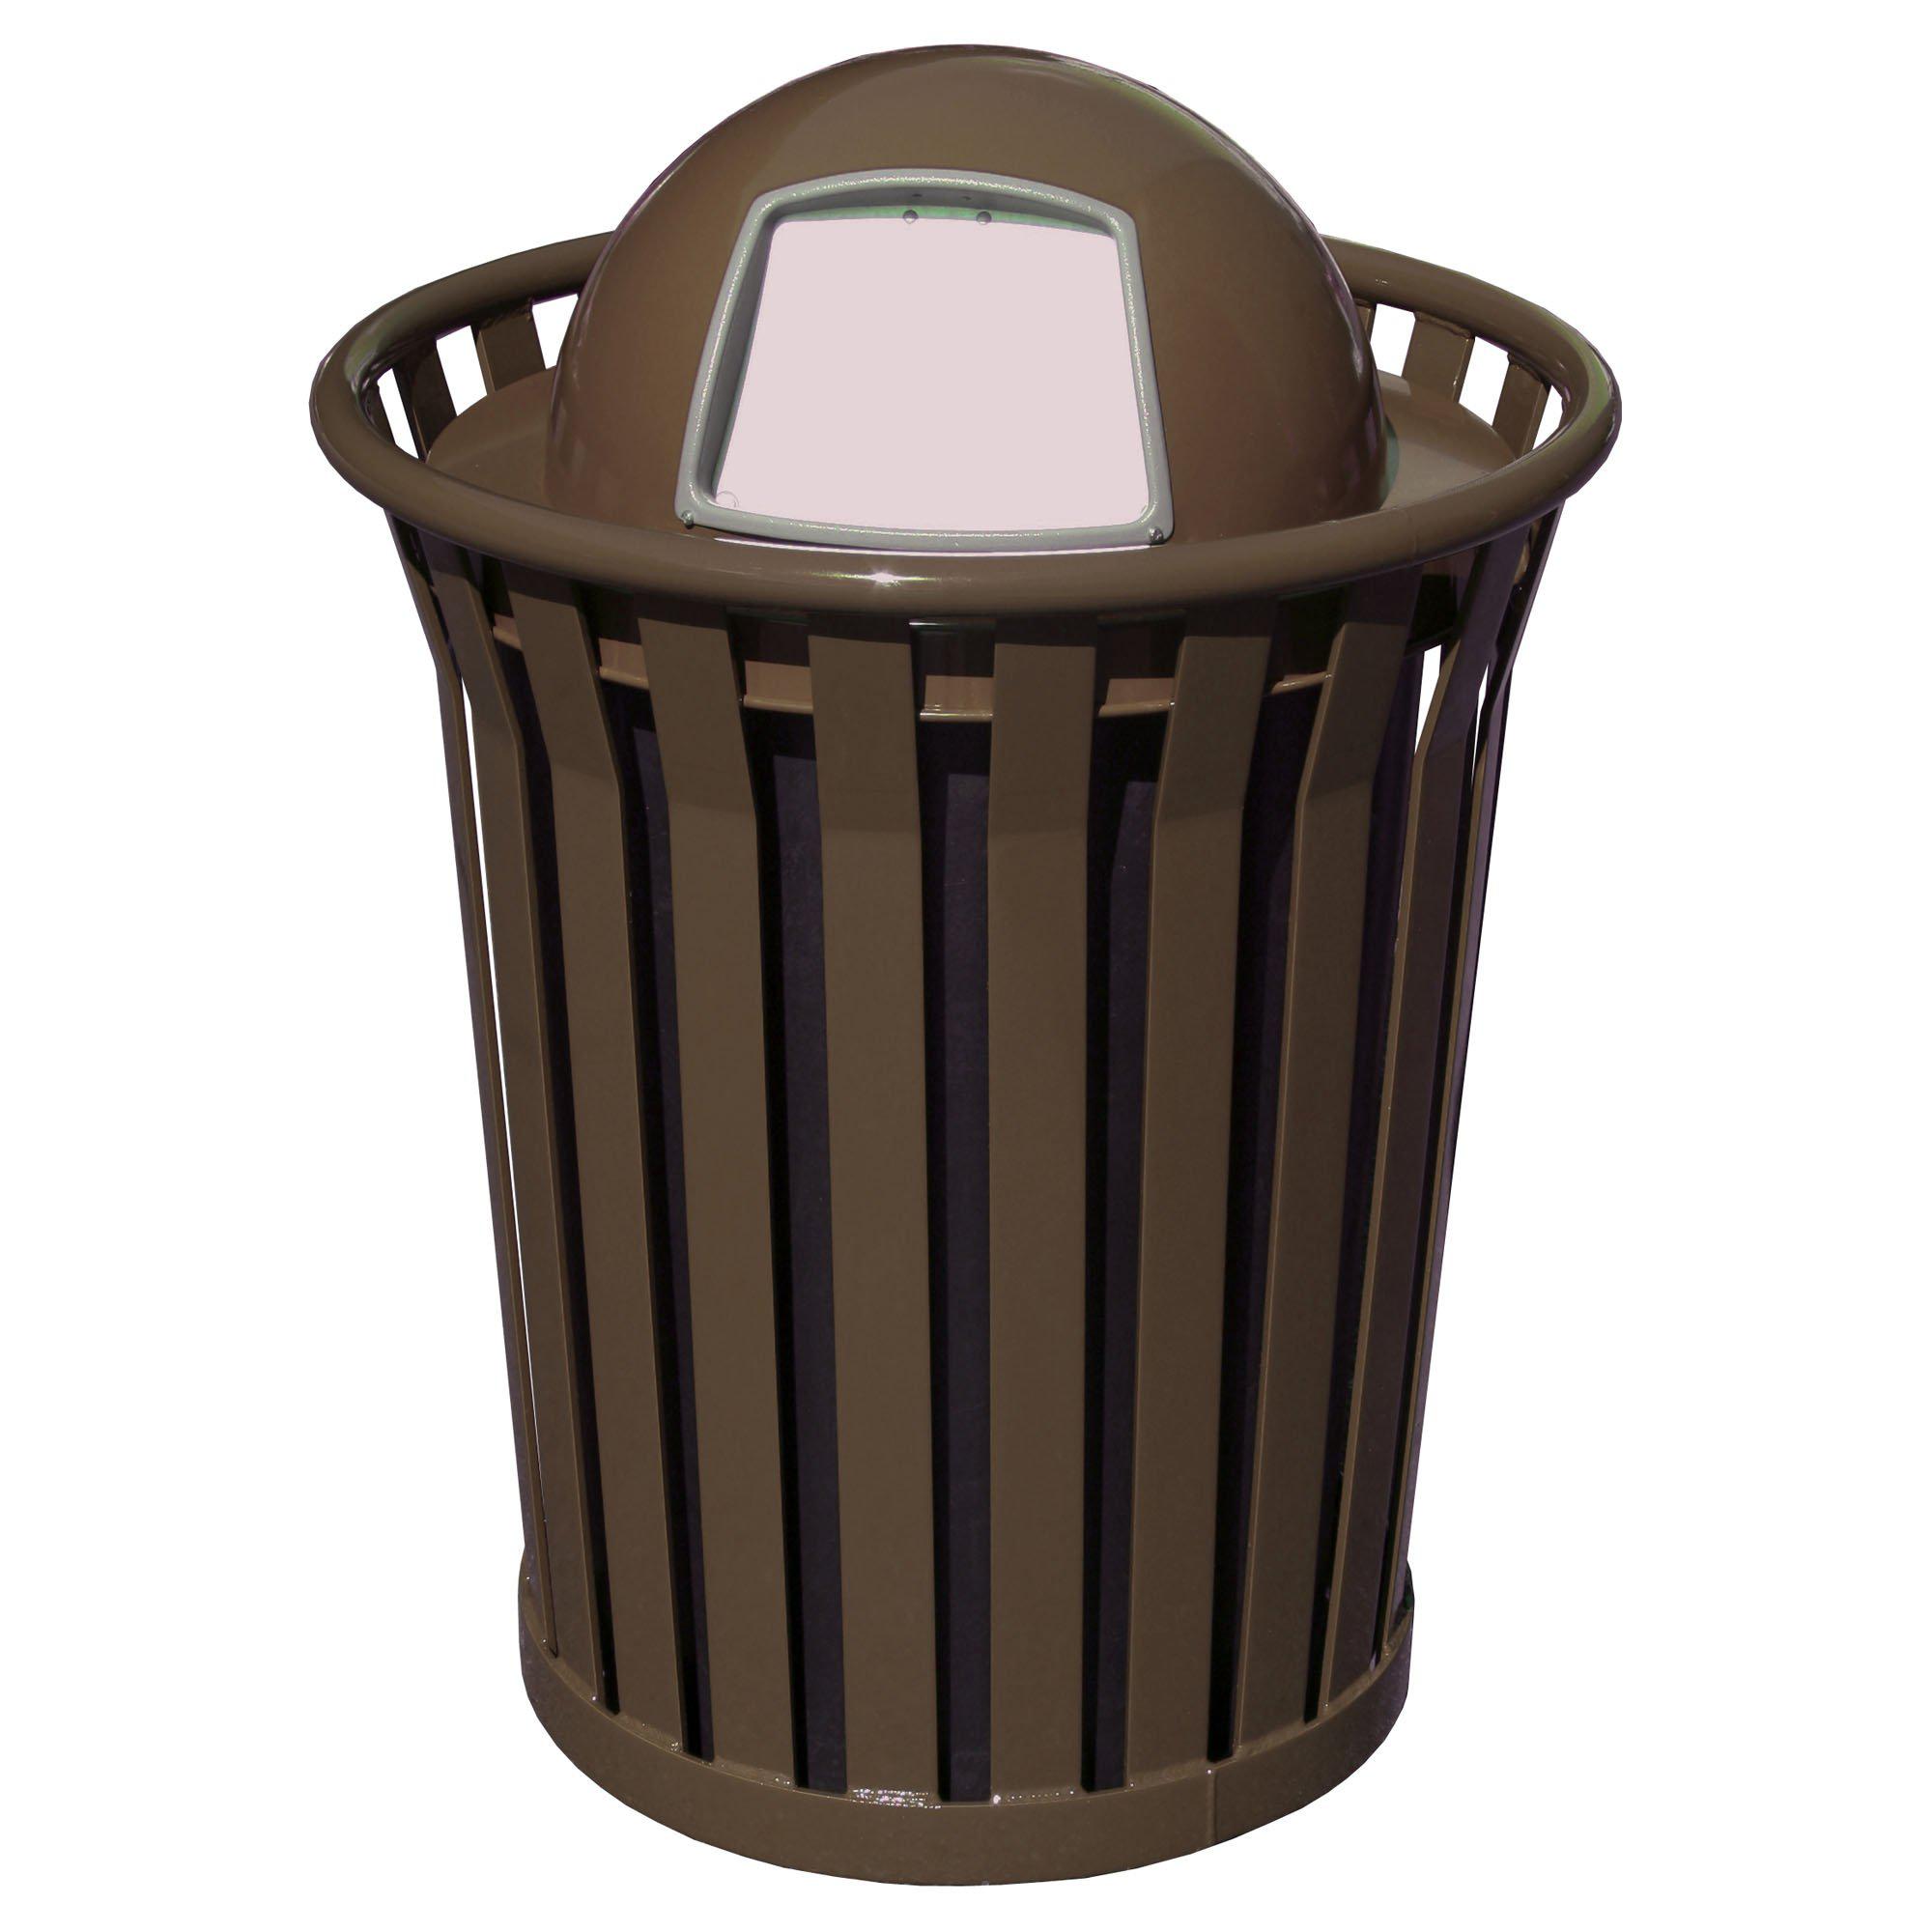 Wydman Collection Heavy Duty Slatted Outdoor Trash Receptacle with Dome Top Lid, 36-Gallon Capacity